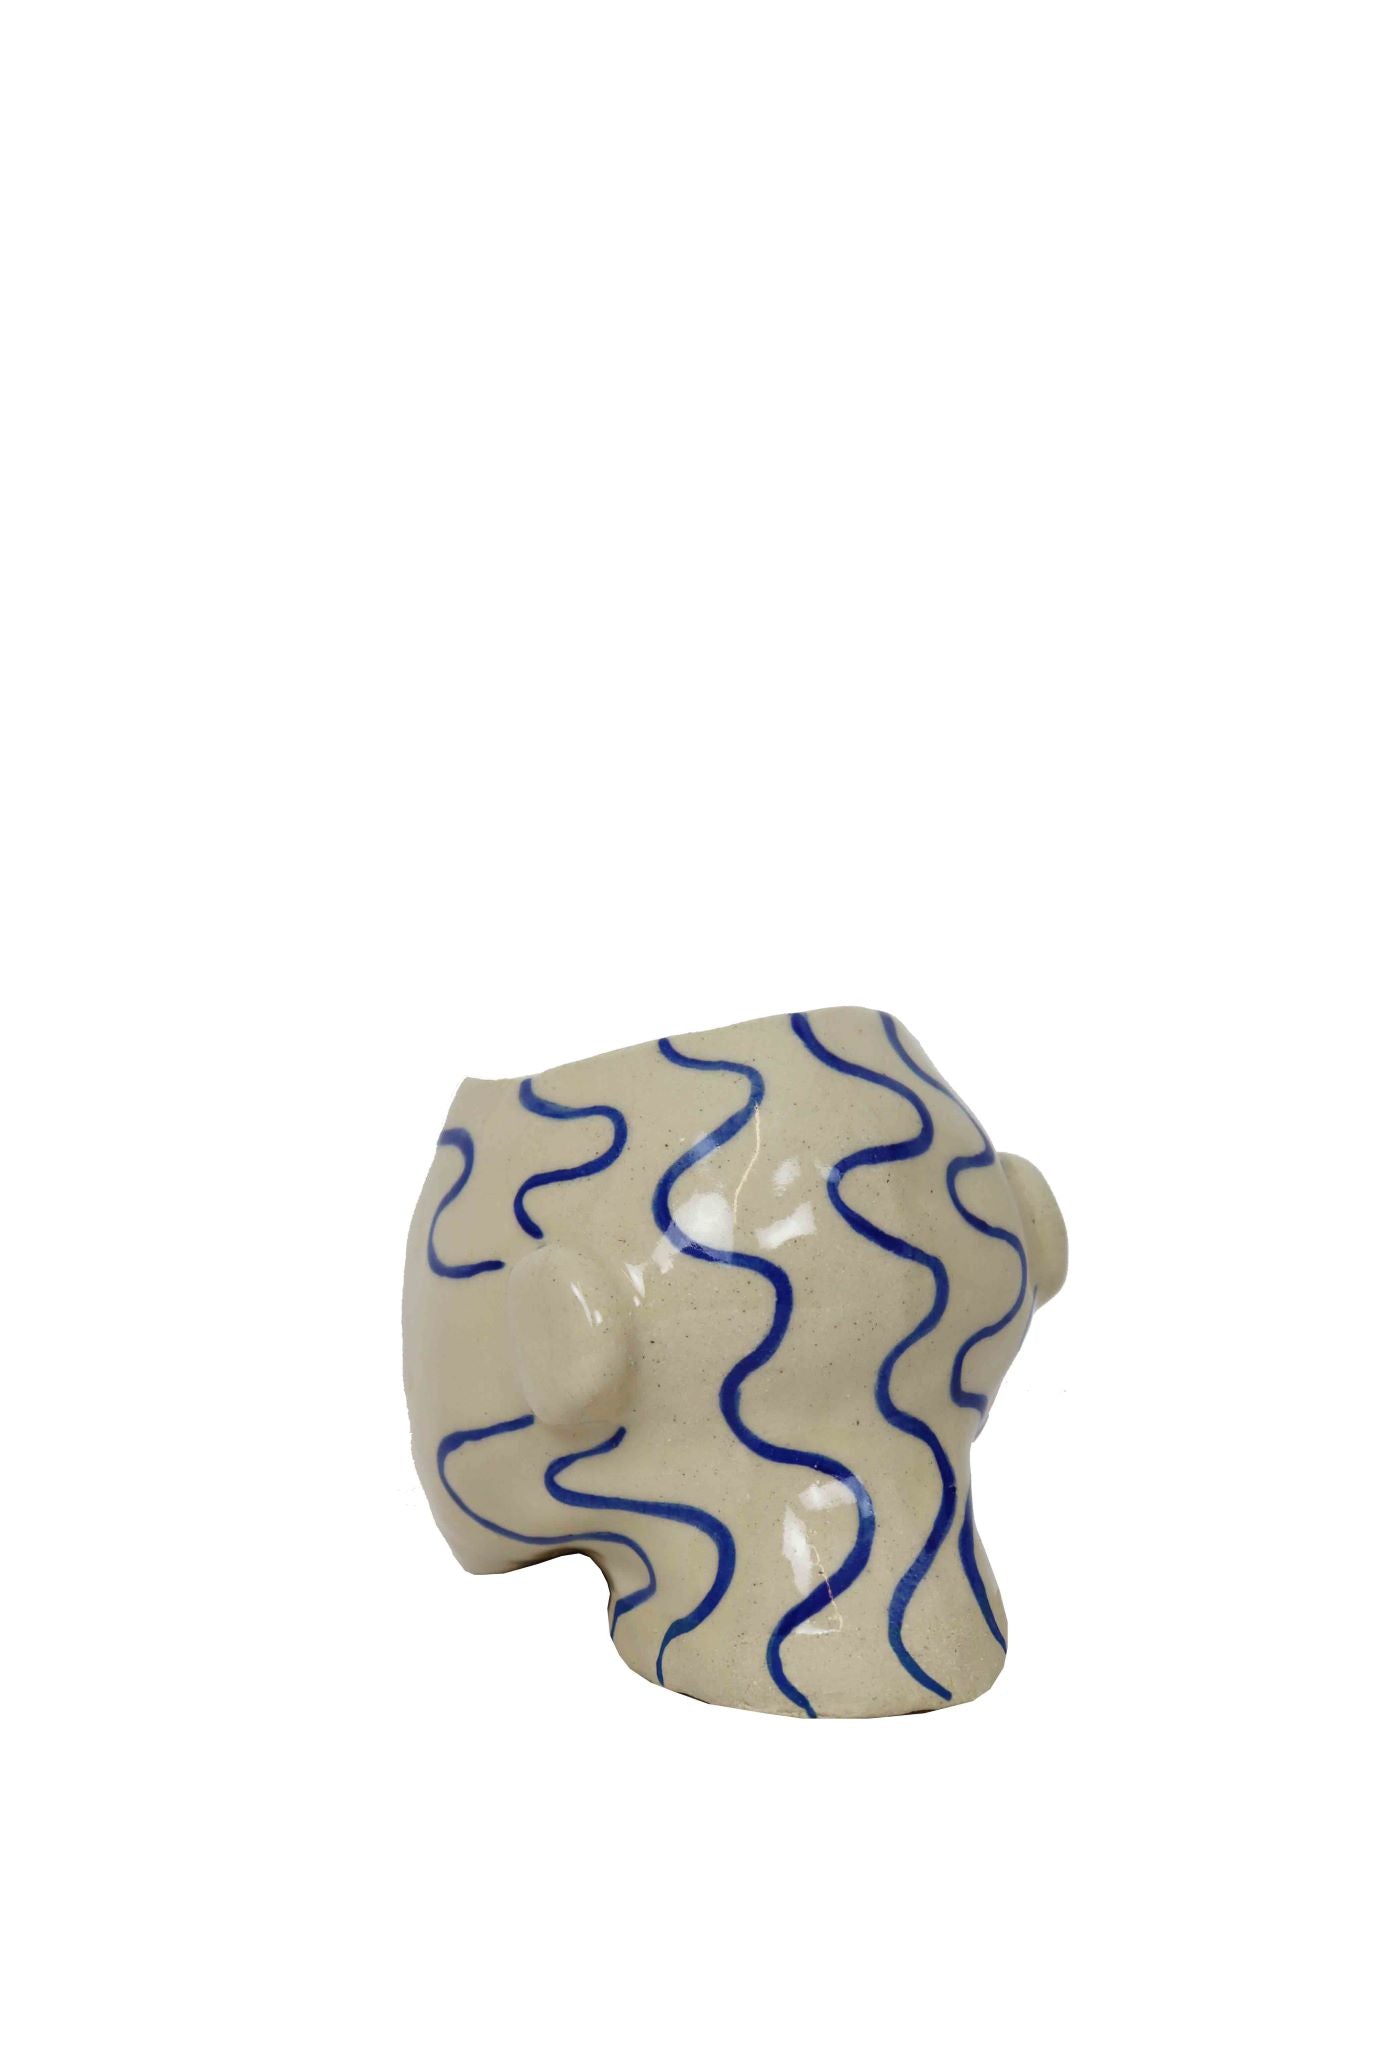 product picture of handmade head pottery planter by Sophie Alda for Cuemars